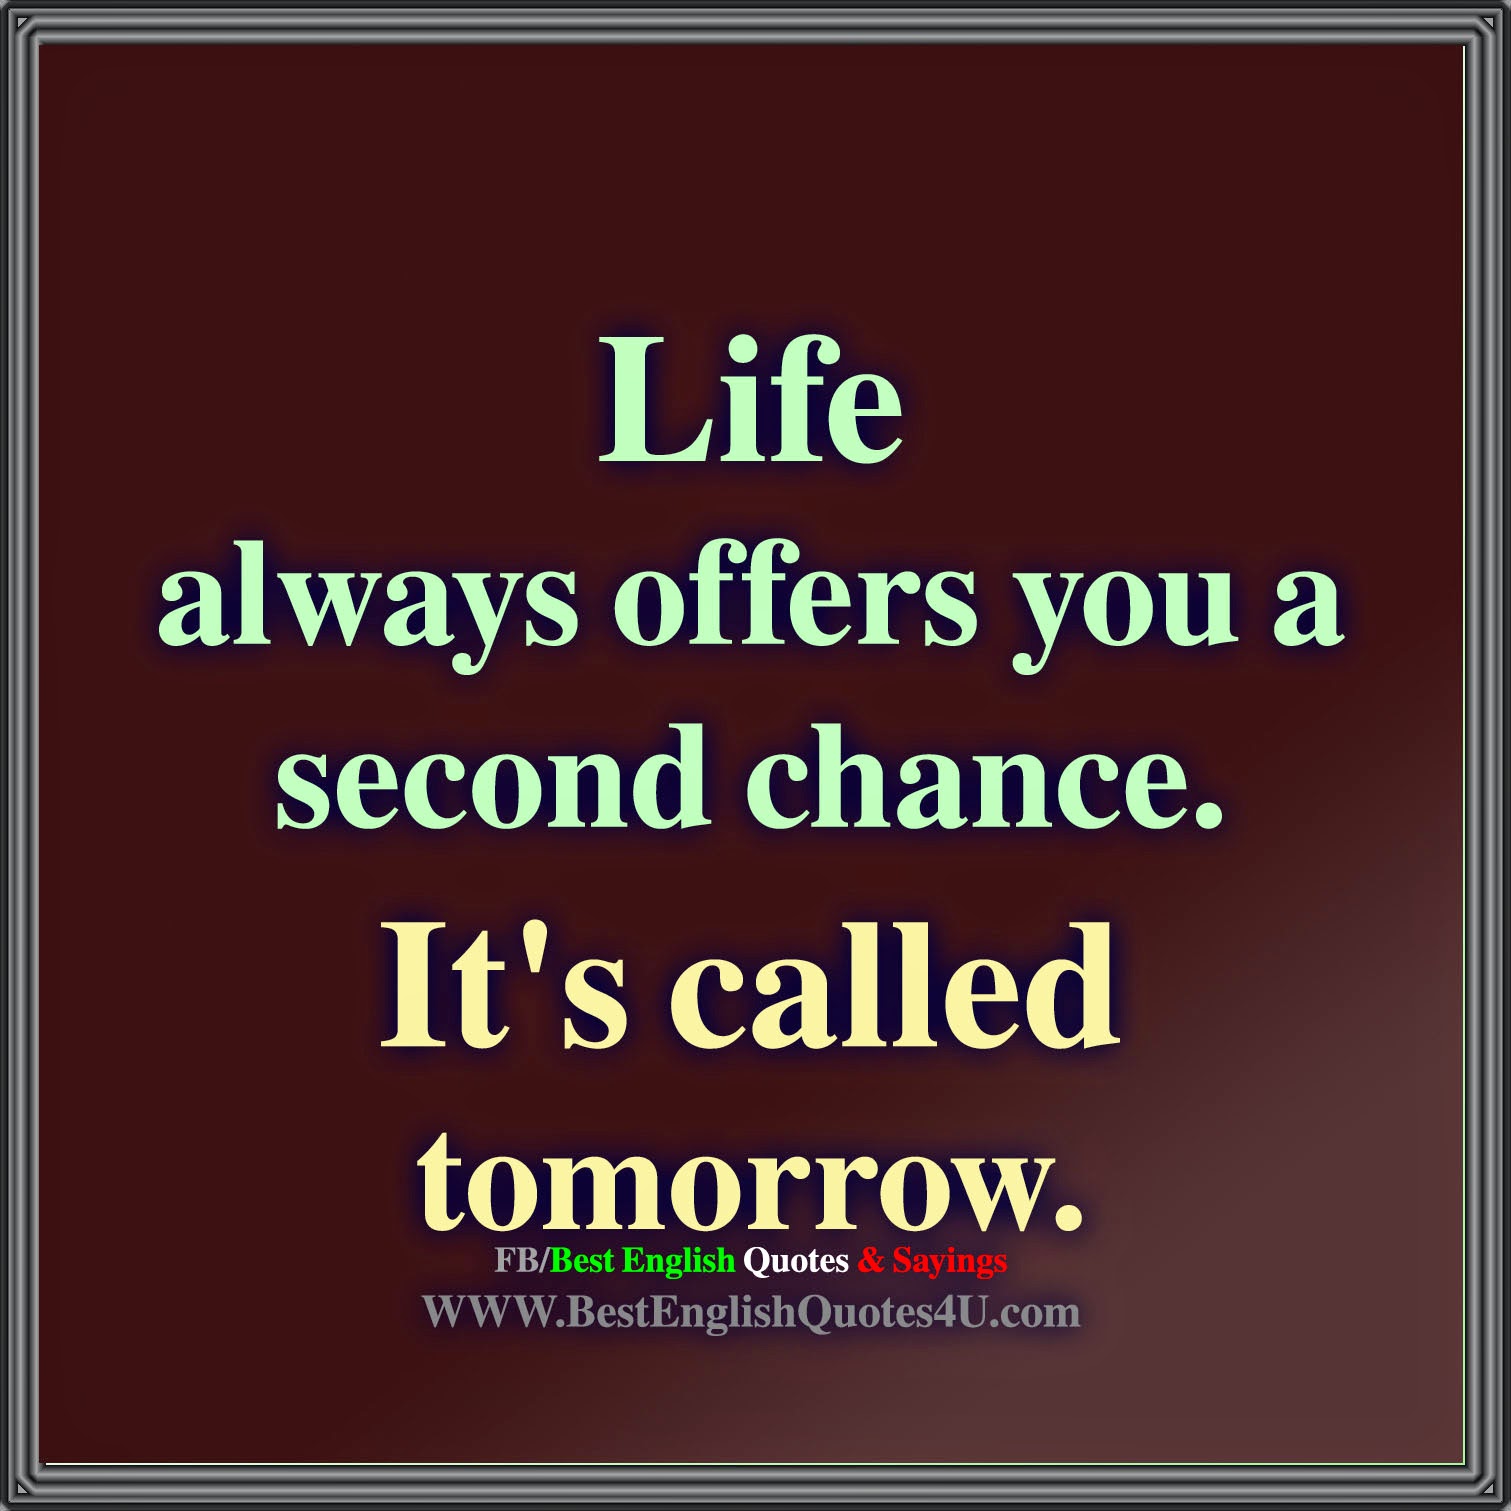 Life always offers you a second chance... | Best English Quotes & Sayings